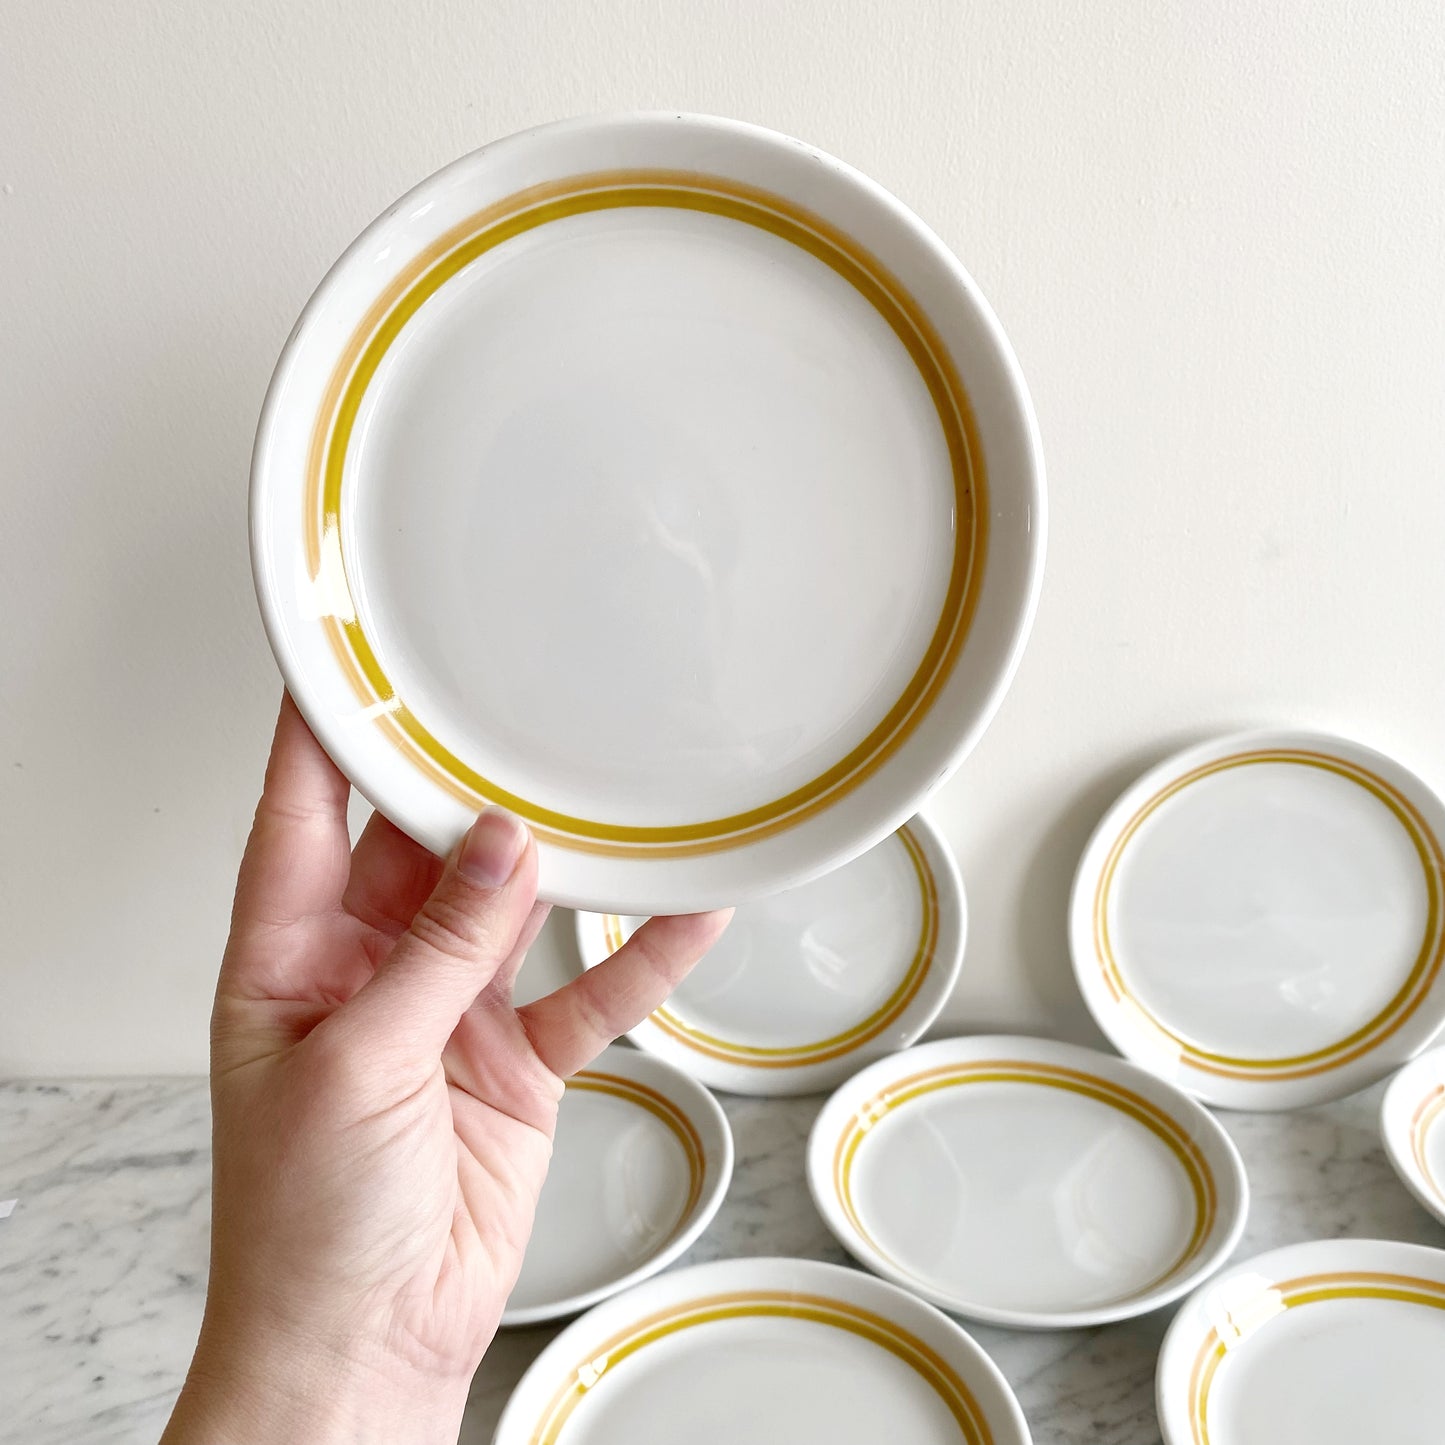 Set of 8 Small Vintage Plates / Saucers